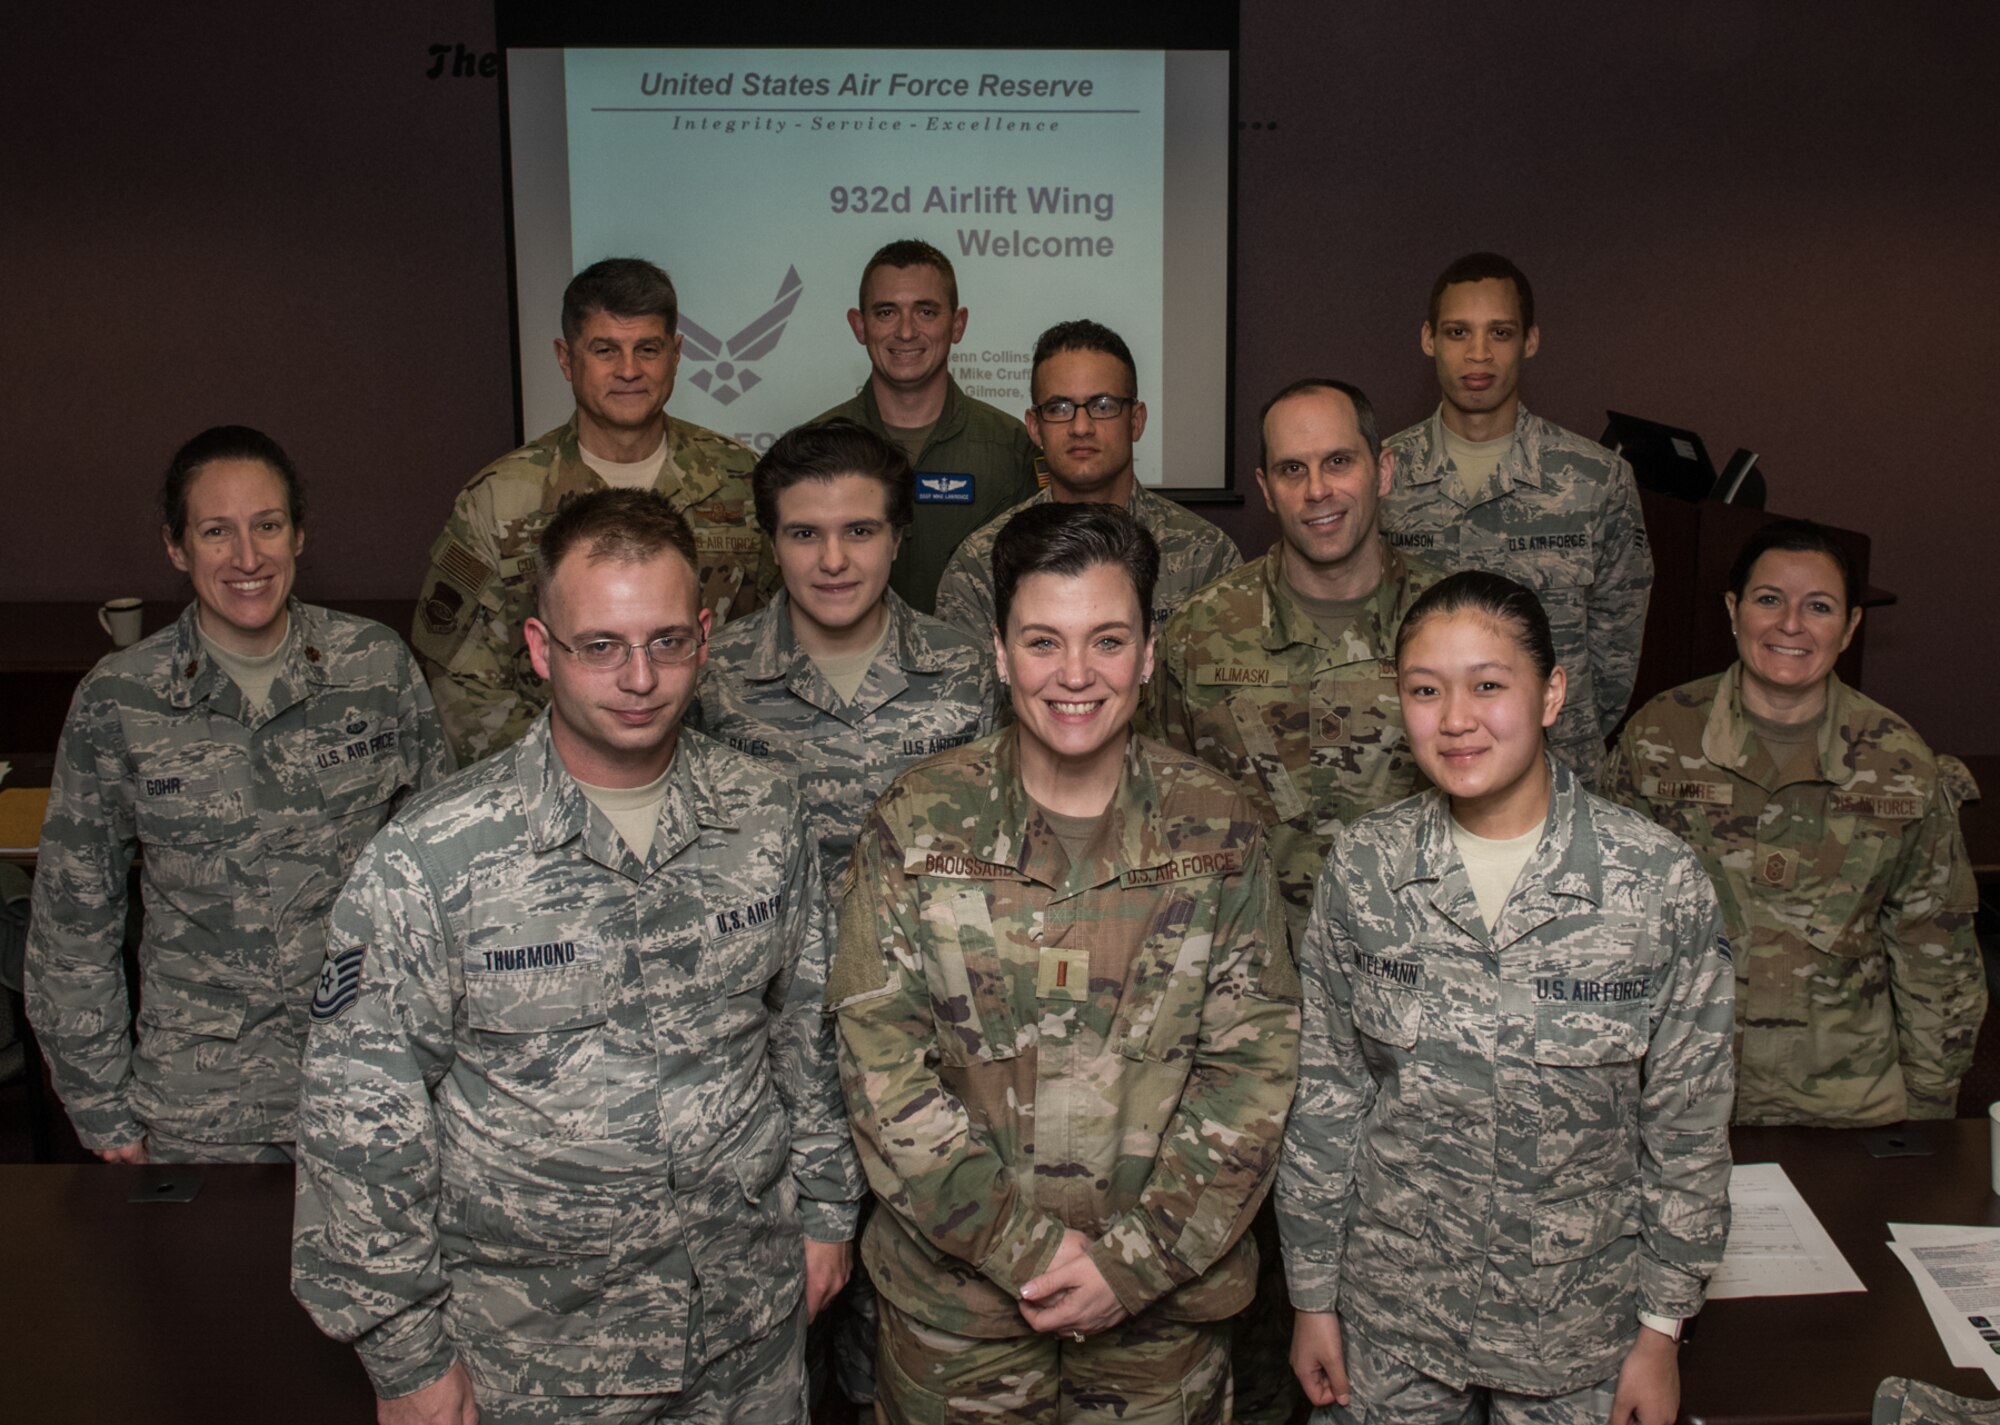 932nd Airlift Wing commander, Col. Glenn Collins, left, rear row, along with Command Chief Barbara Gilmore, far right, take a photo moment with the newest Citizen Airmen to join the 932nd AW family, Jan. 11, 2020, Scott Air Force Base, Illinois at the monthly newcomers briefing.  Each unit training assembly leadership greets, shares the 932nd AW mission, organization chart and answers questions as a welcome to the Wing.  (U.S. Air Force photo by Master Sgt. Christopher Parr)